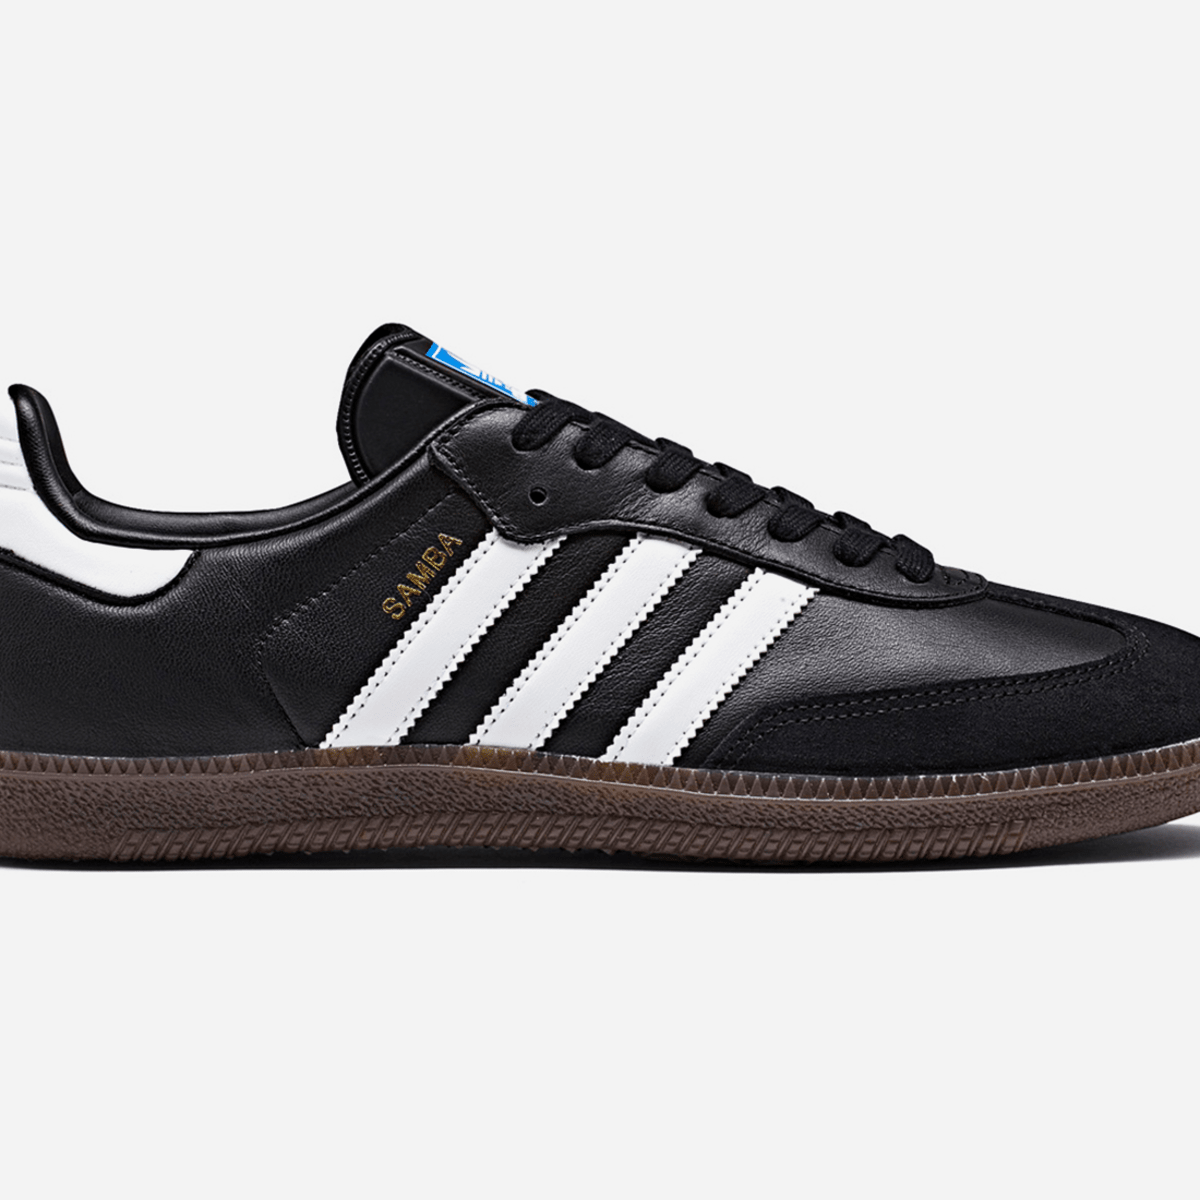 The adidas Samba Just Went On Sale for 